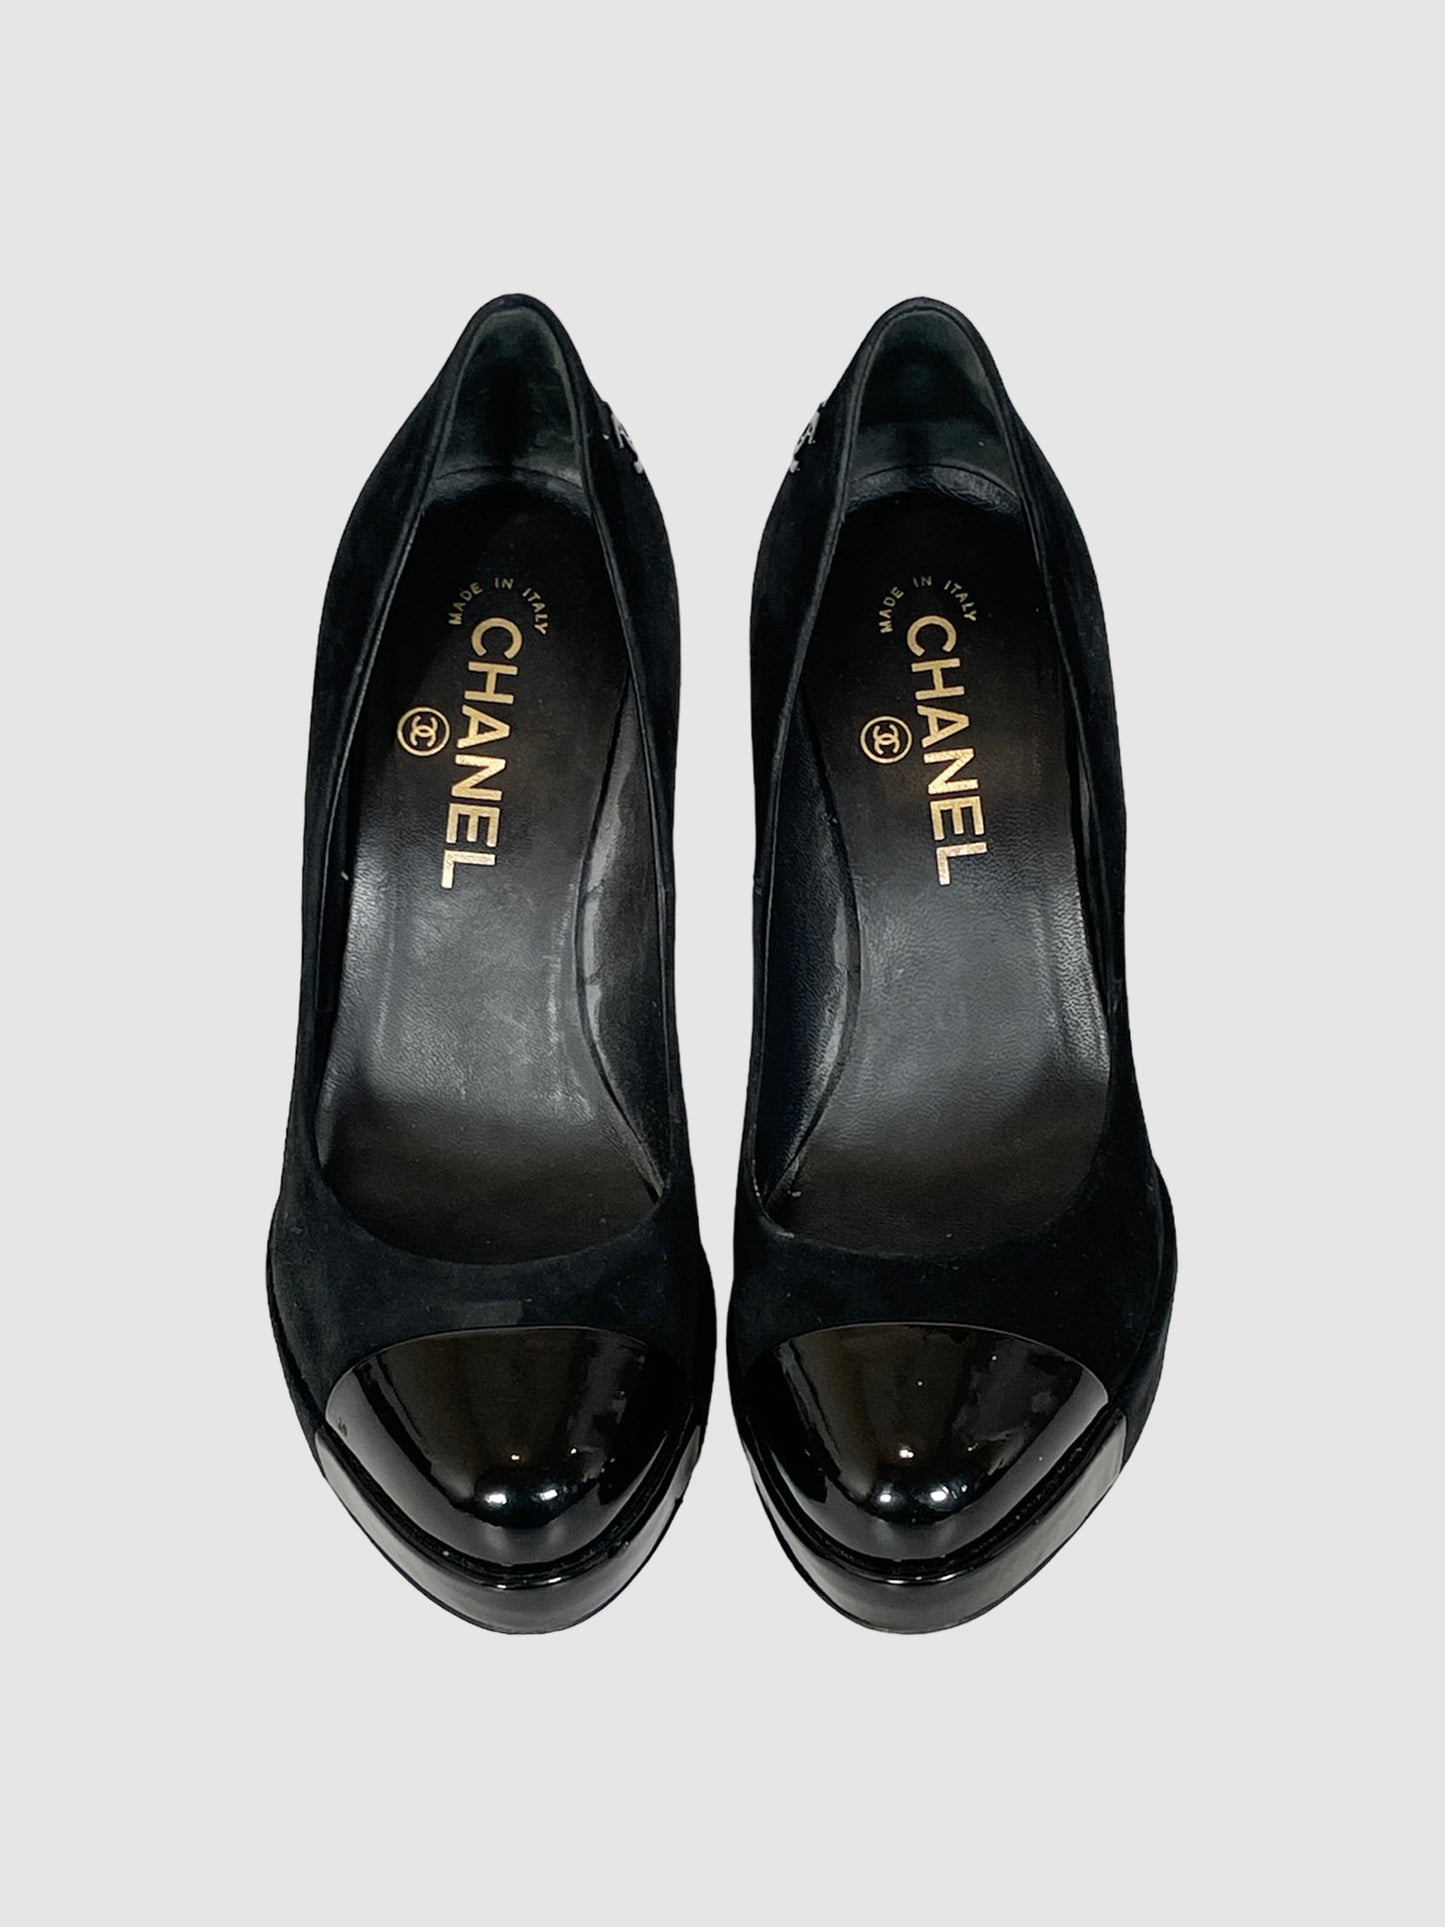 Chanel Suede with Patent Accent Pumps - Size 6.5